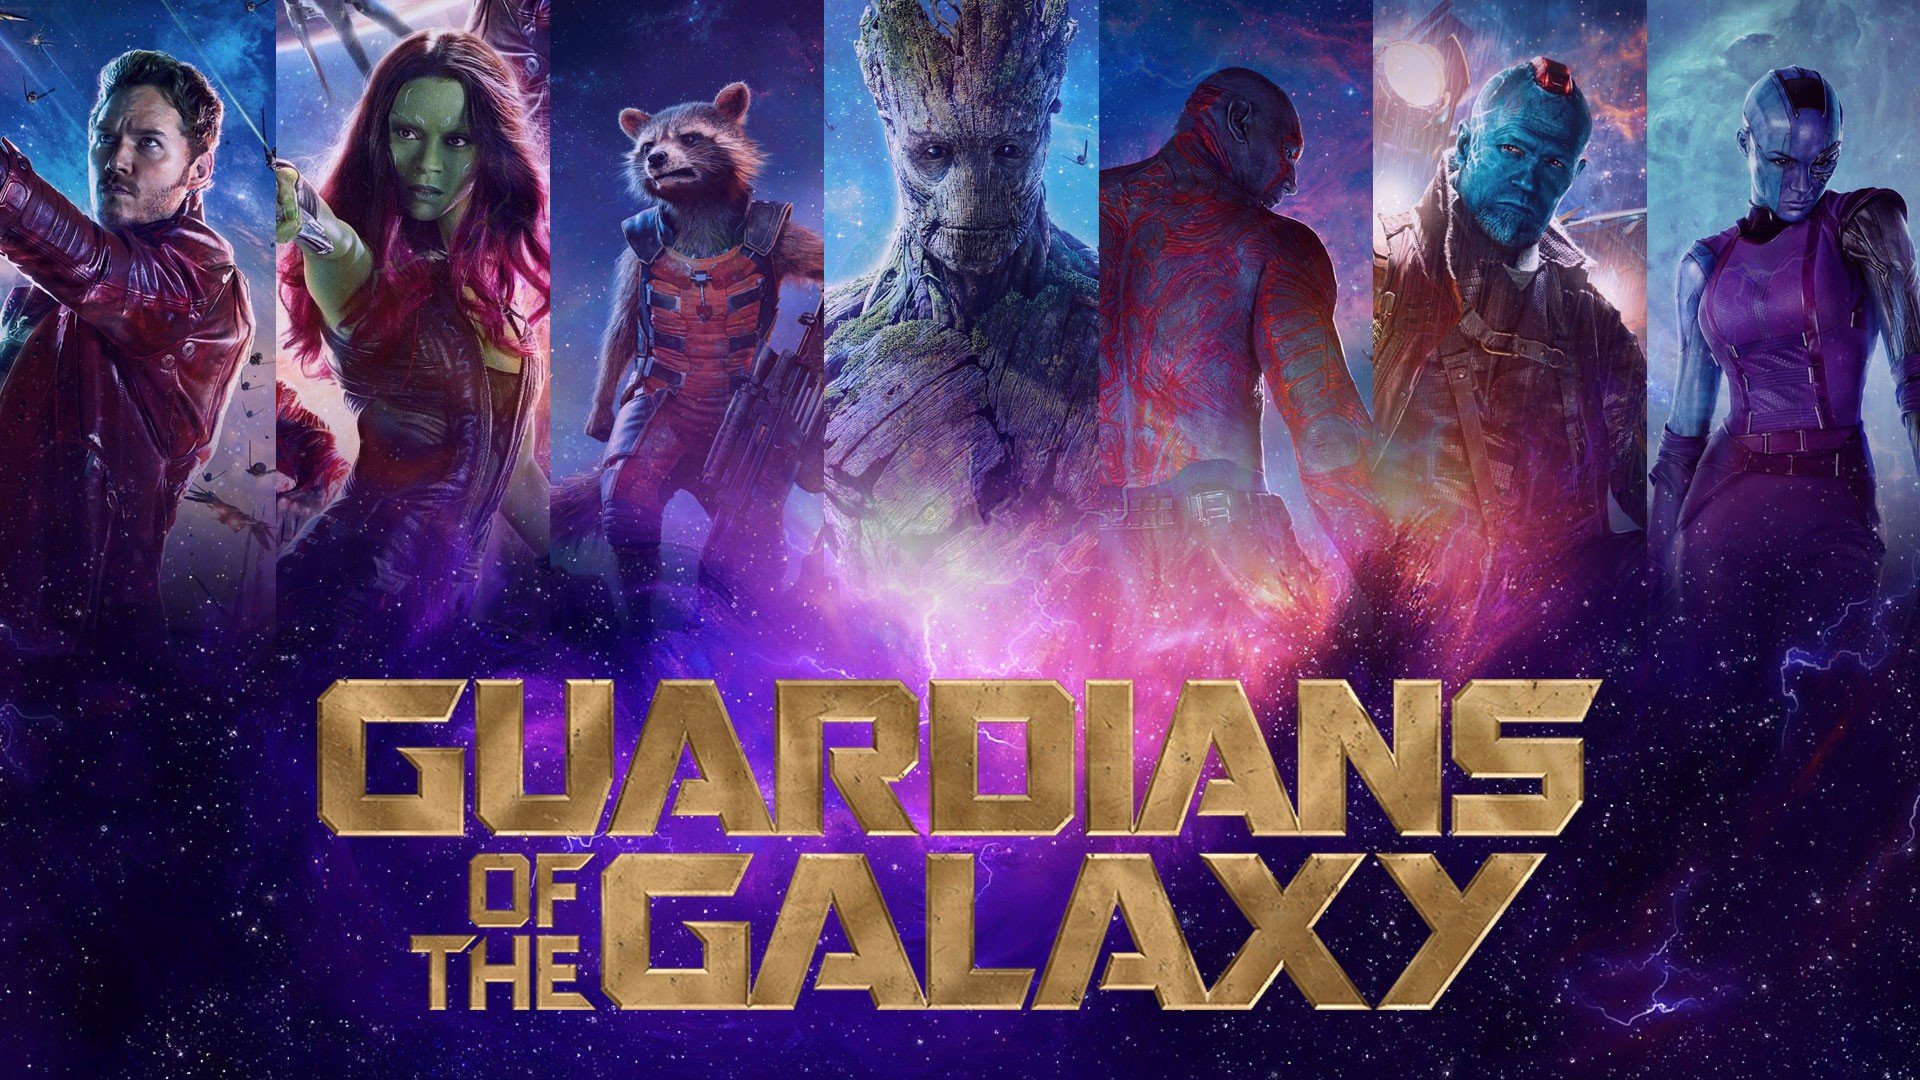 Star Lord, Gamora, Rocket Raccoon, Drax the Destroyer, Yondu Udonta, Guardians of the Galaxy, Marvel Cinematic Universe, The Groot, Nebula Wallpaper HD / Desktop and Mobile Background